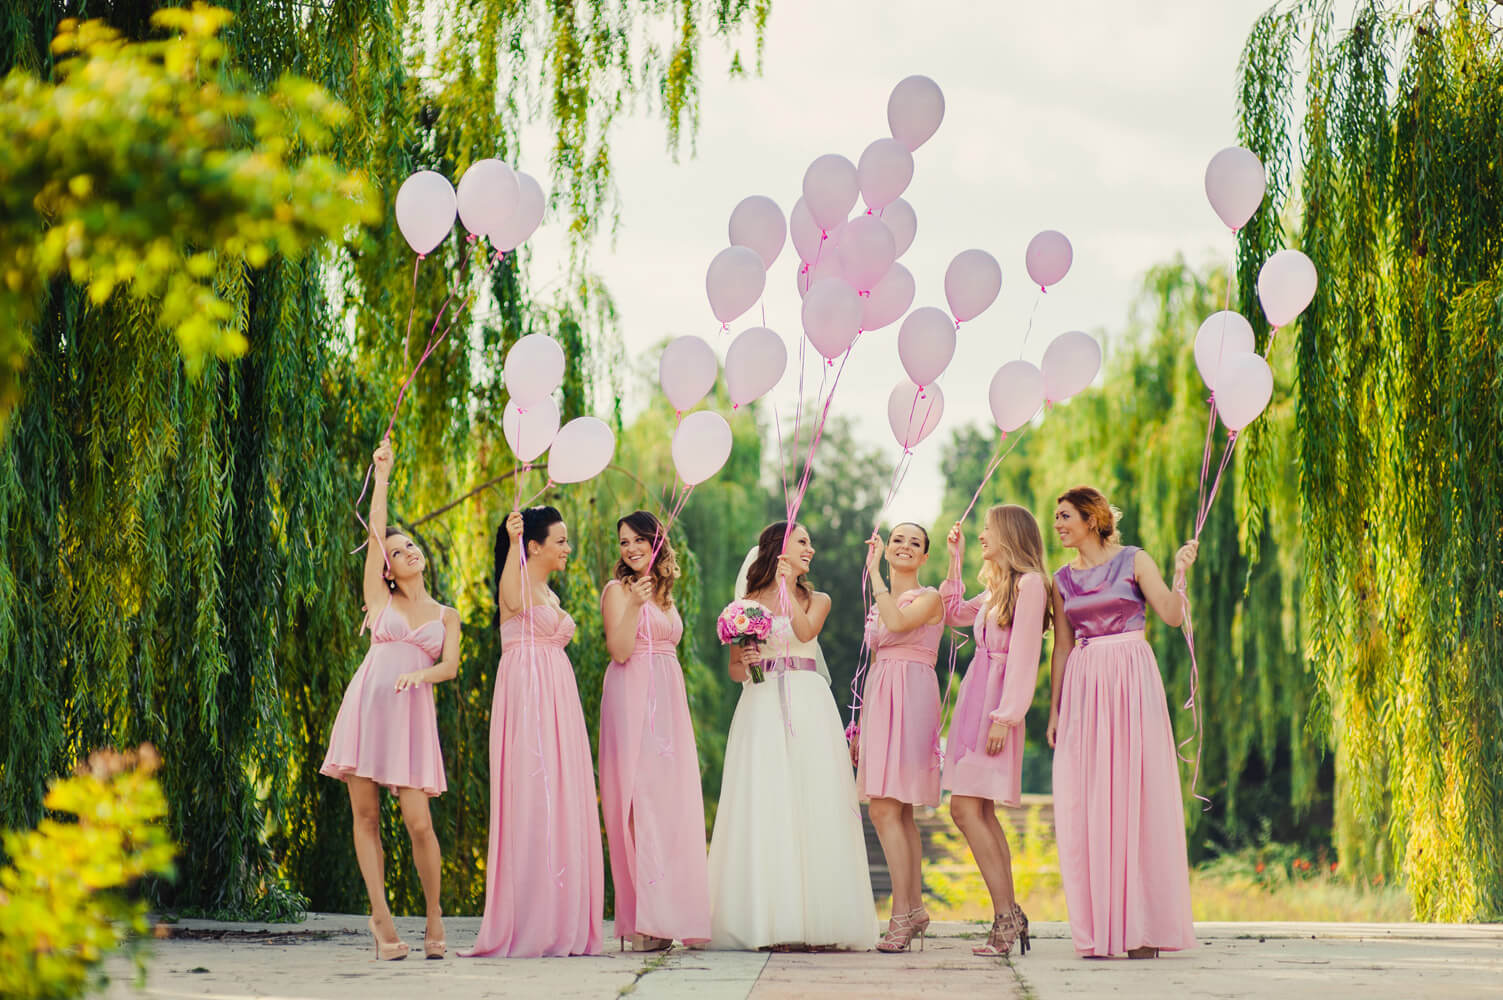 7 Photos With Your Bridesmaids That You Absolutely Need